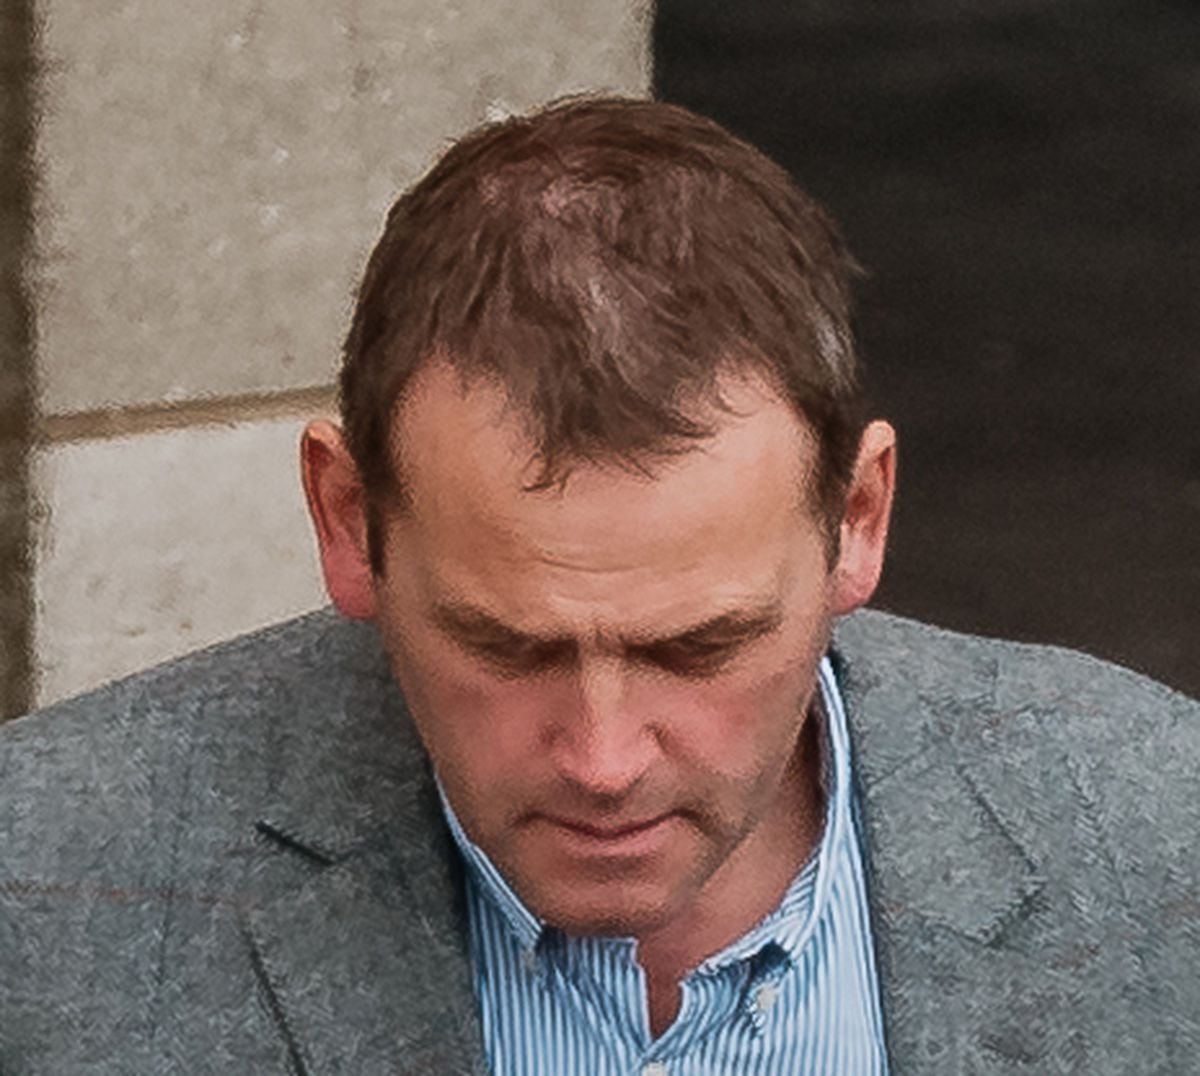 Michael Dewsbury, the brother-in-law of Joe Hollingsworth and father of Robert McKeown's former partner Elaine